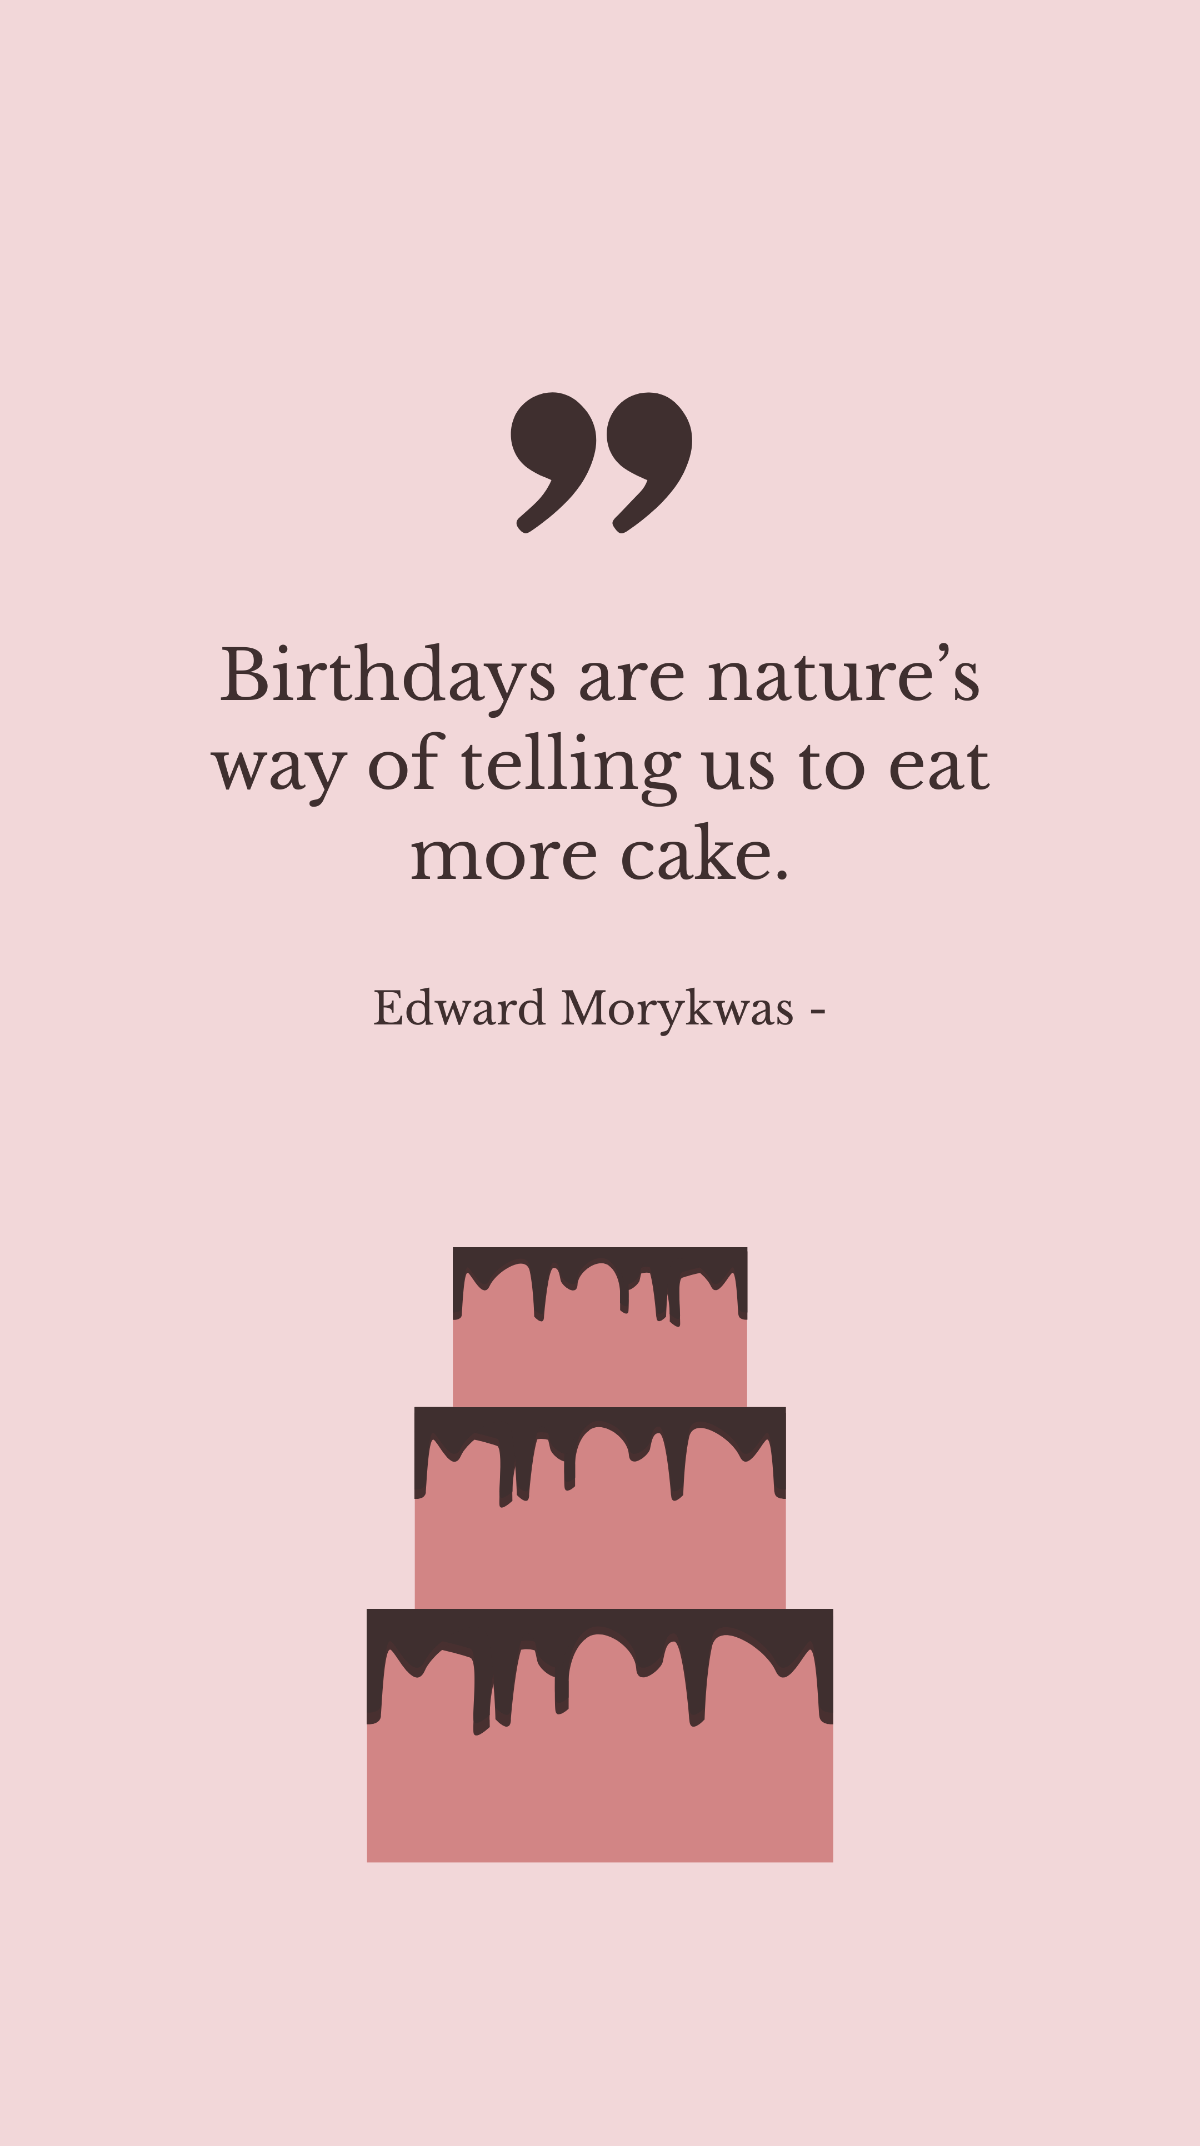 Edward Morykwas - Birthdays are nature’s way of telling us to eat more cake. Template